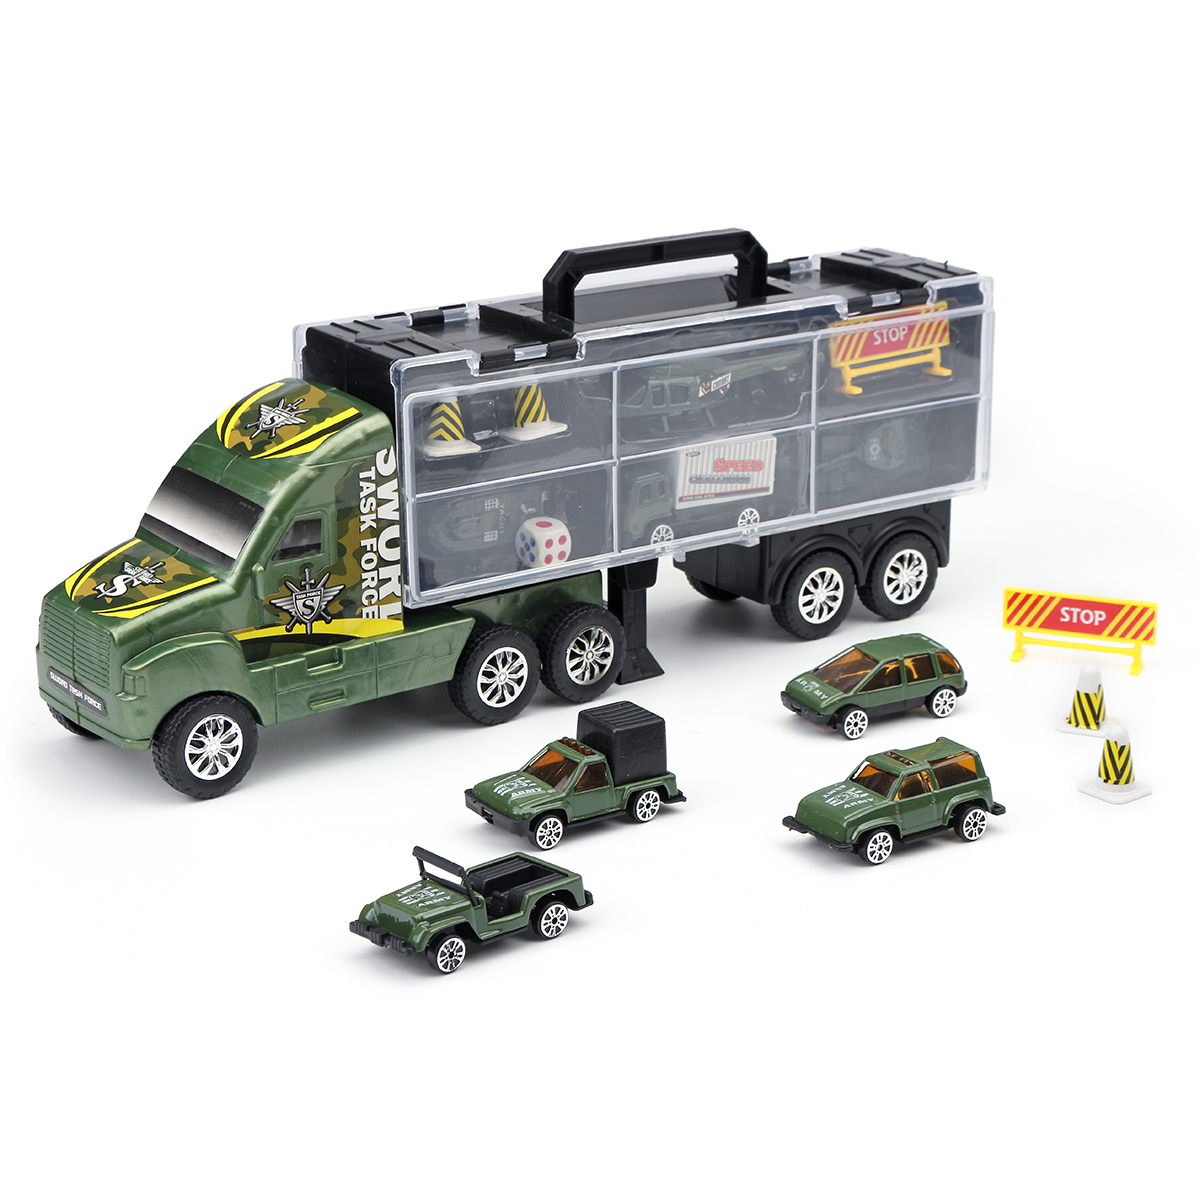 Alloy-Trailer-Container-Car-Storage-Box-Diecast-Car-Model-Set-Toy-for-Childrens-Gift-1635959-8